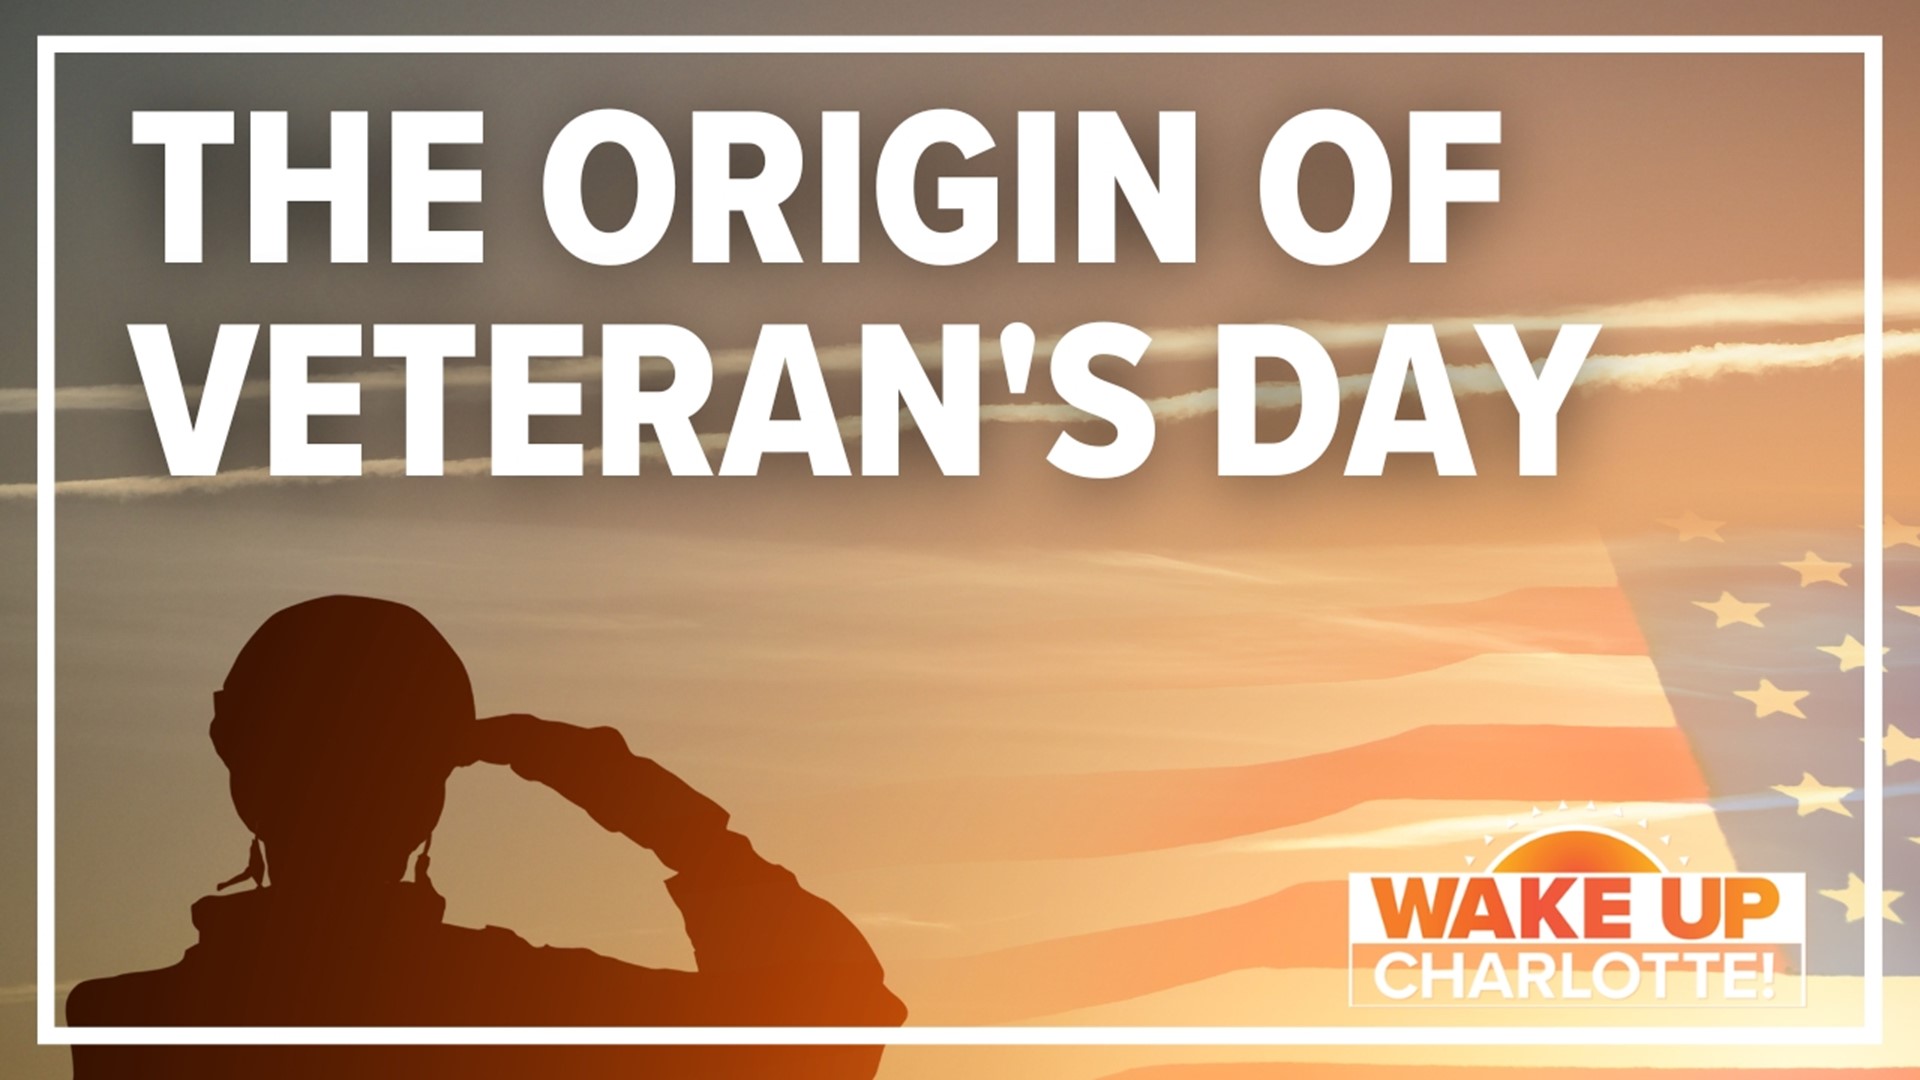 Veteran's Day originally came out of WWI but didn't become an official holiday until years later.